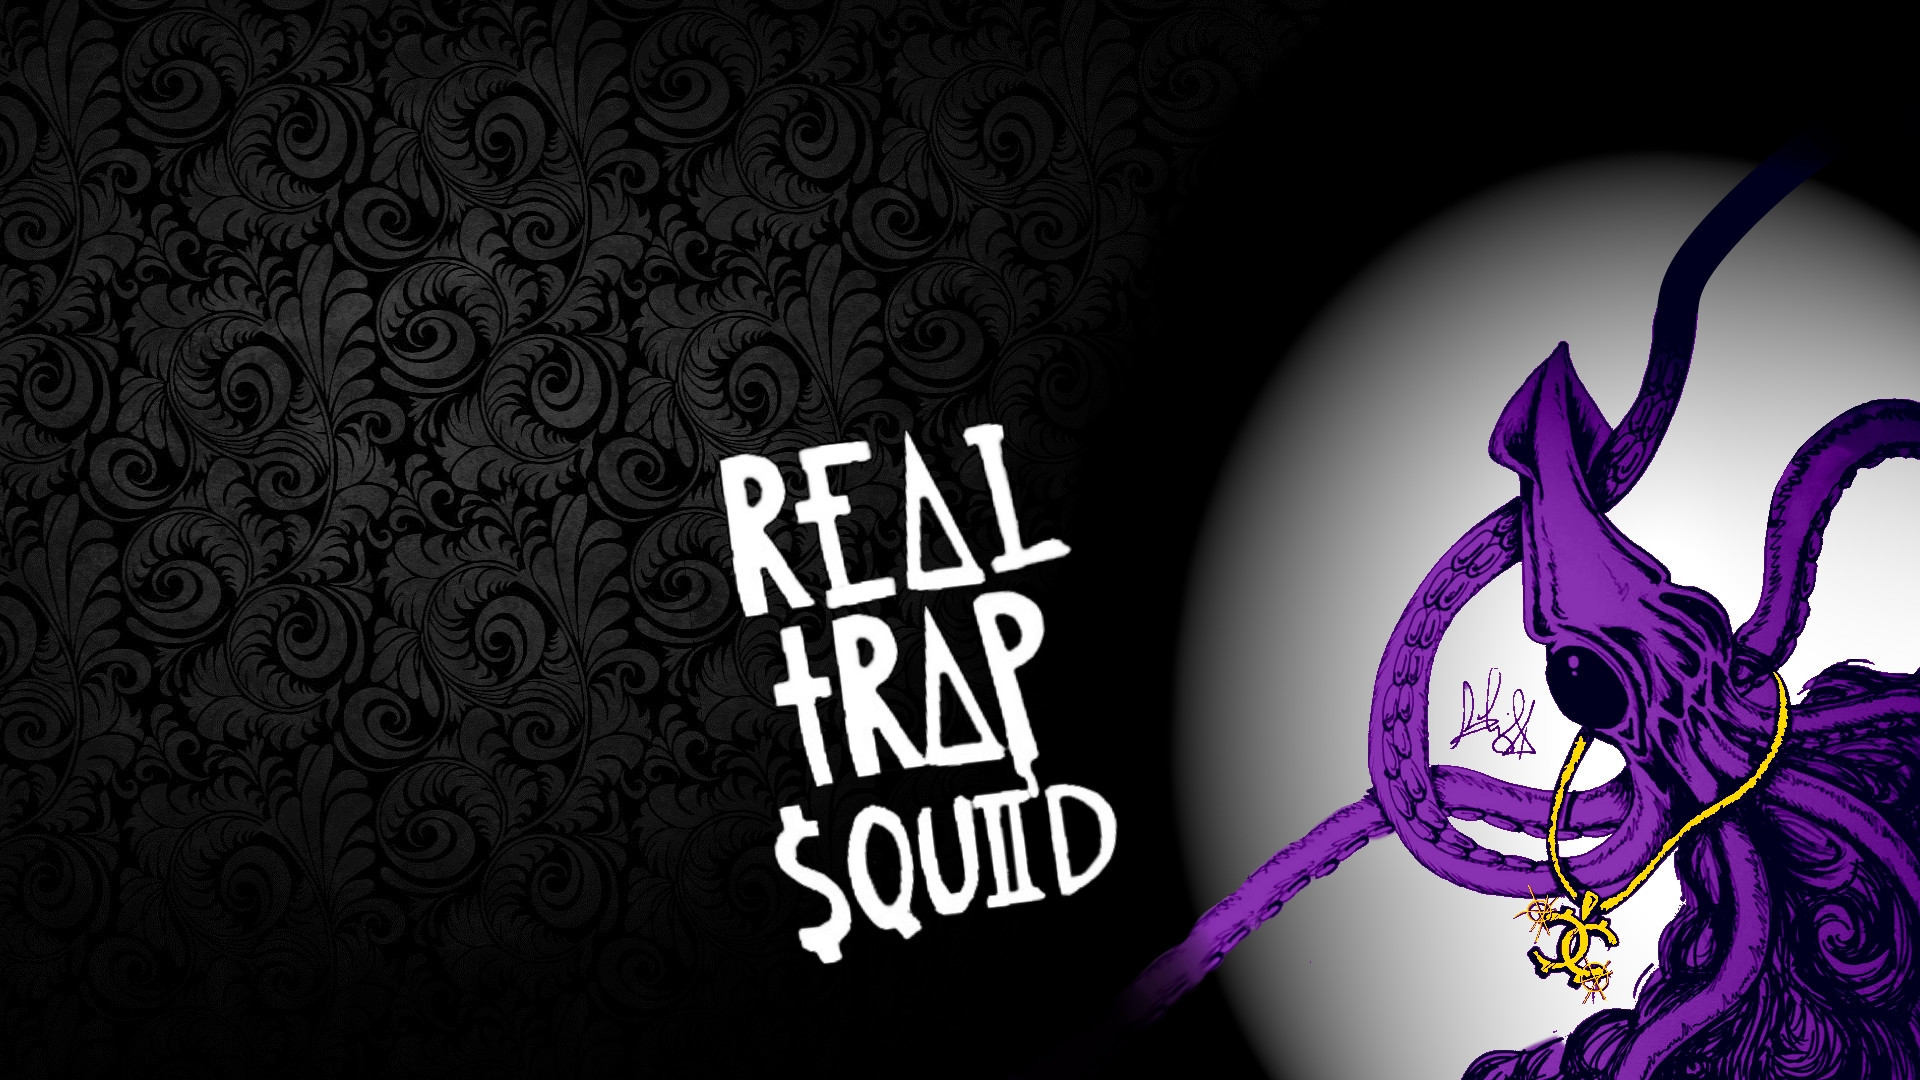 1920x1080 Made a  wallpaper of the Trap Squid. /r/Wallpapers showed no love.